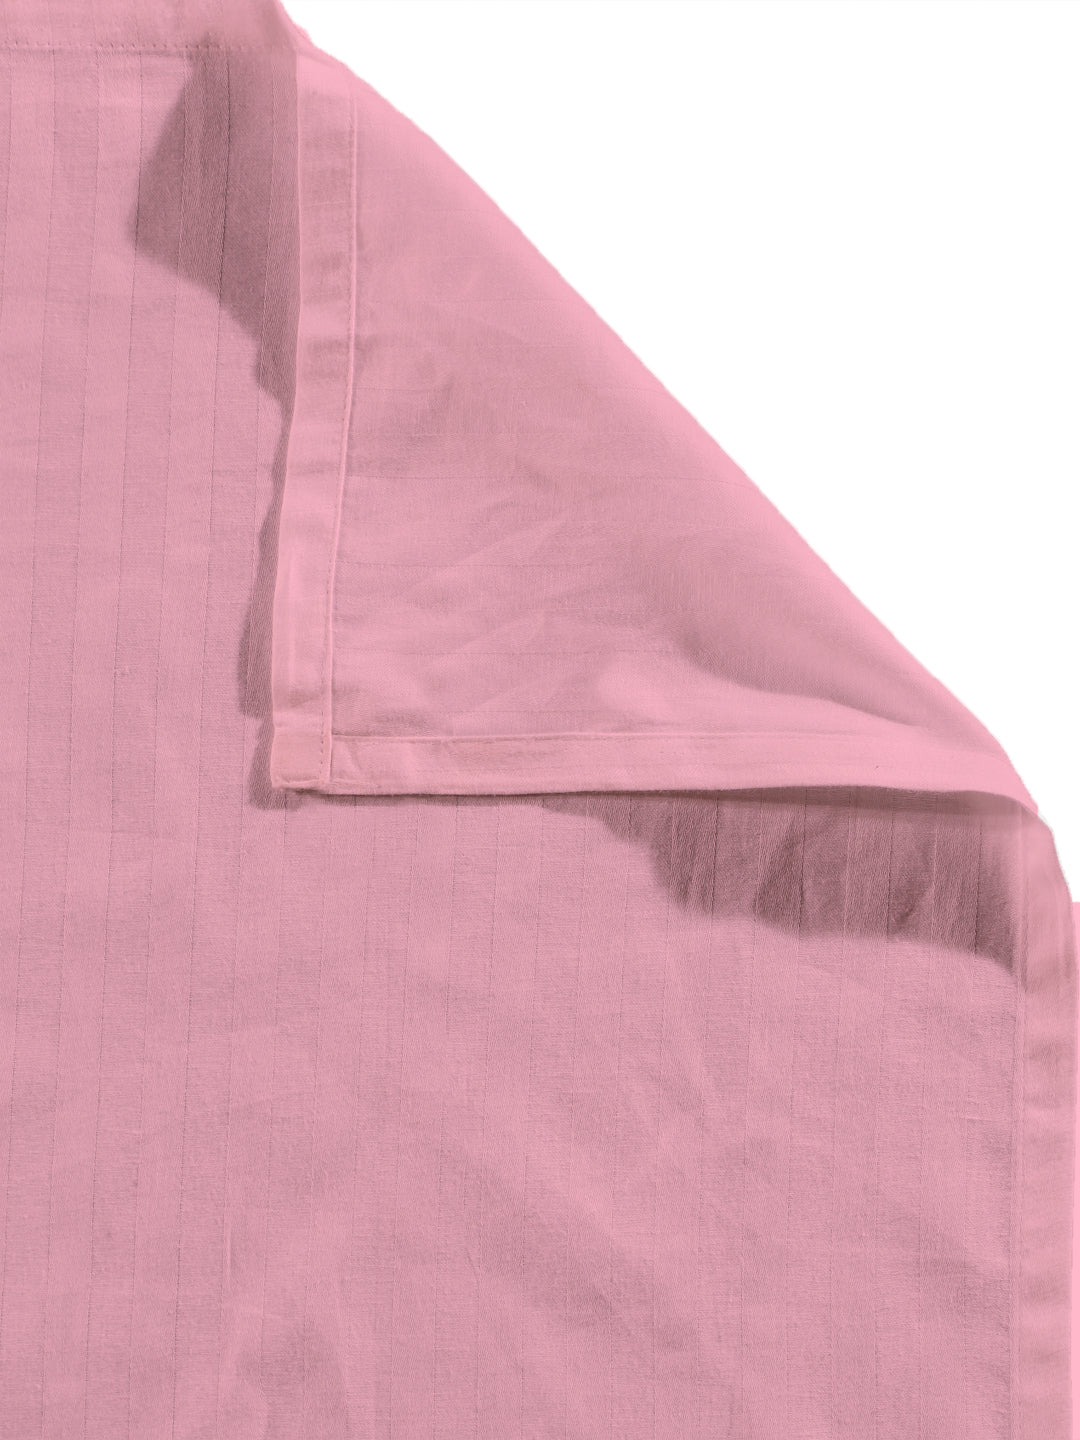 Arrabi Pink Stripes TC Cotton Blend King Size Bookfold Bedsheet with 2 Pillow Covers (250 X 220 cm)